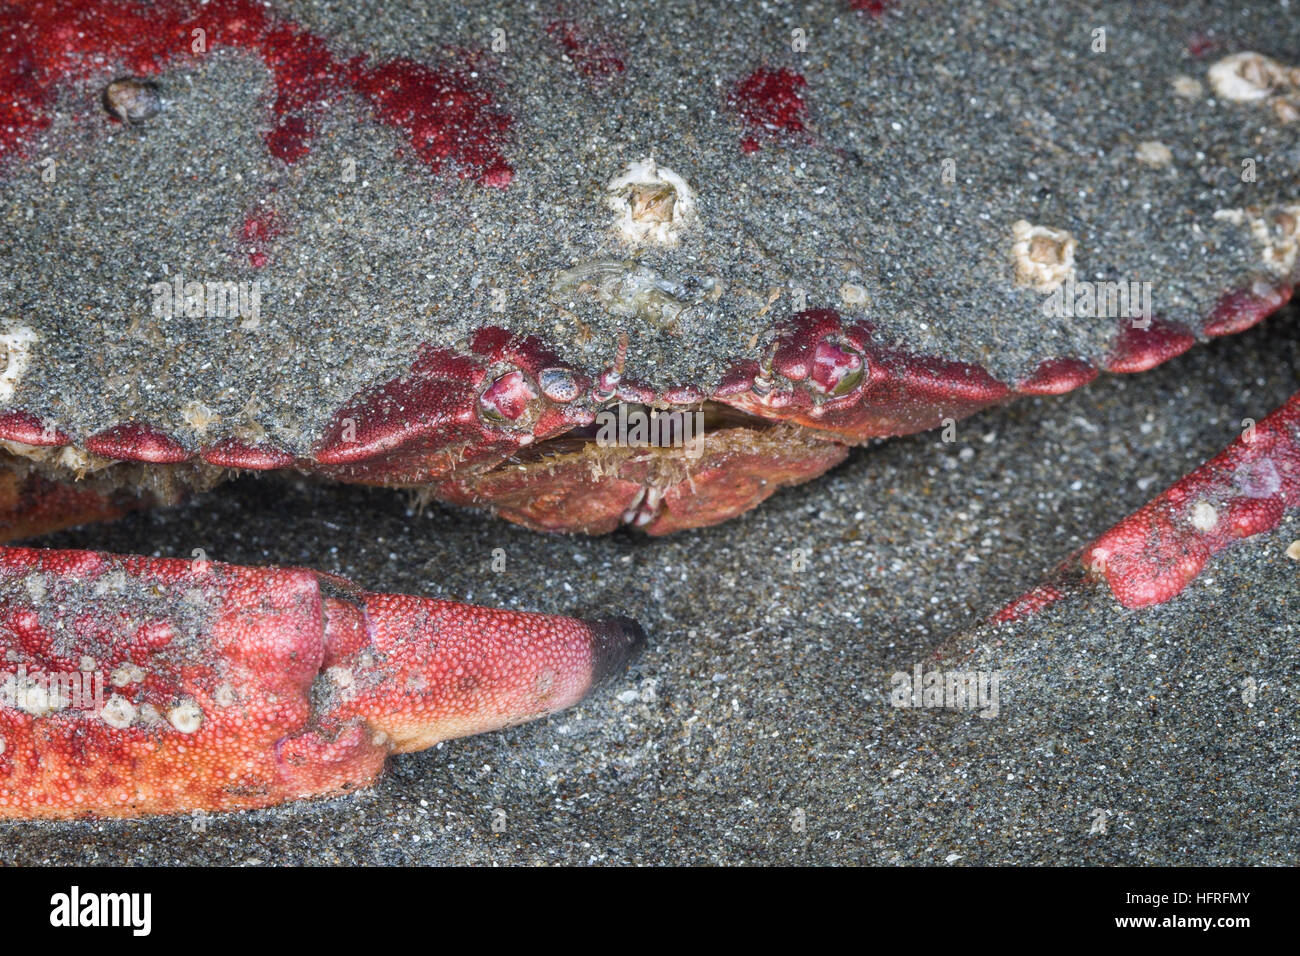 Close-up of a Pacific rock crab crouching in the sand at low tide in Redwood National Park, California, USA. Stock Photo